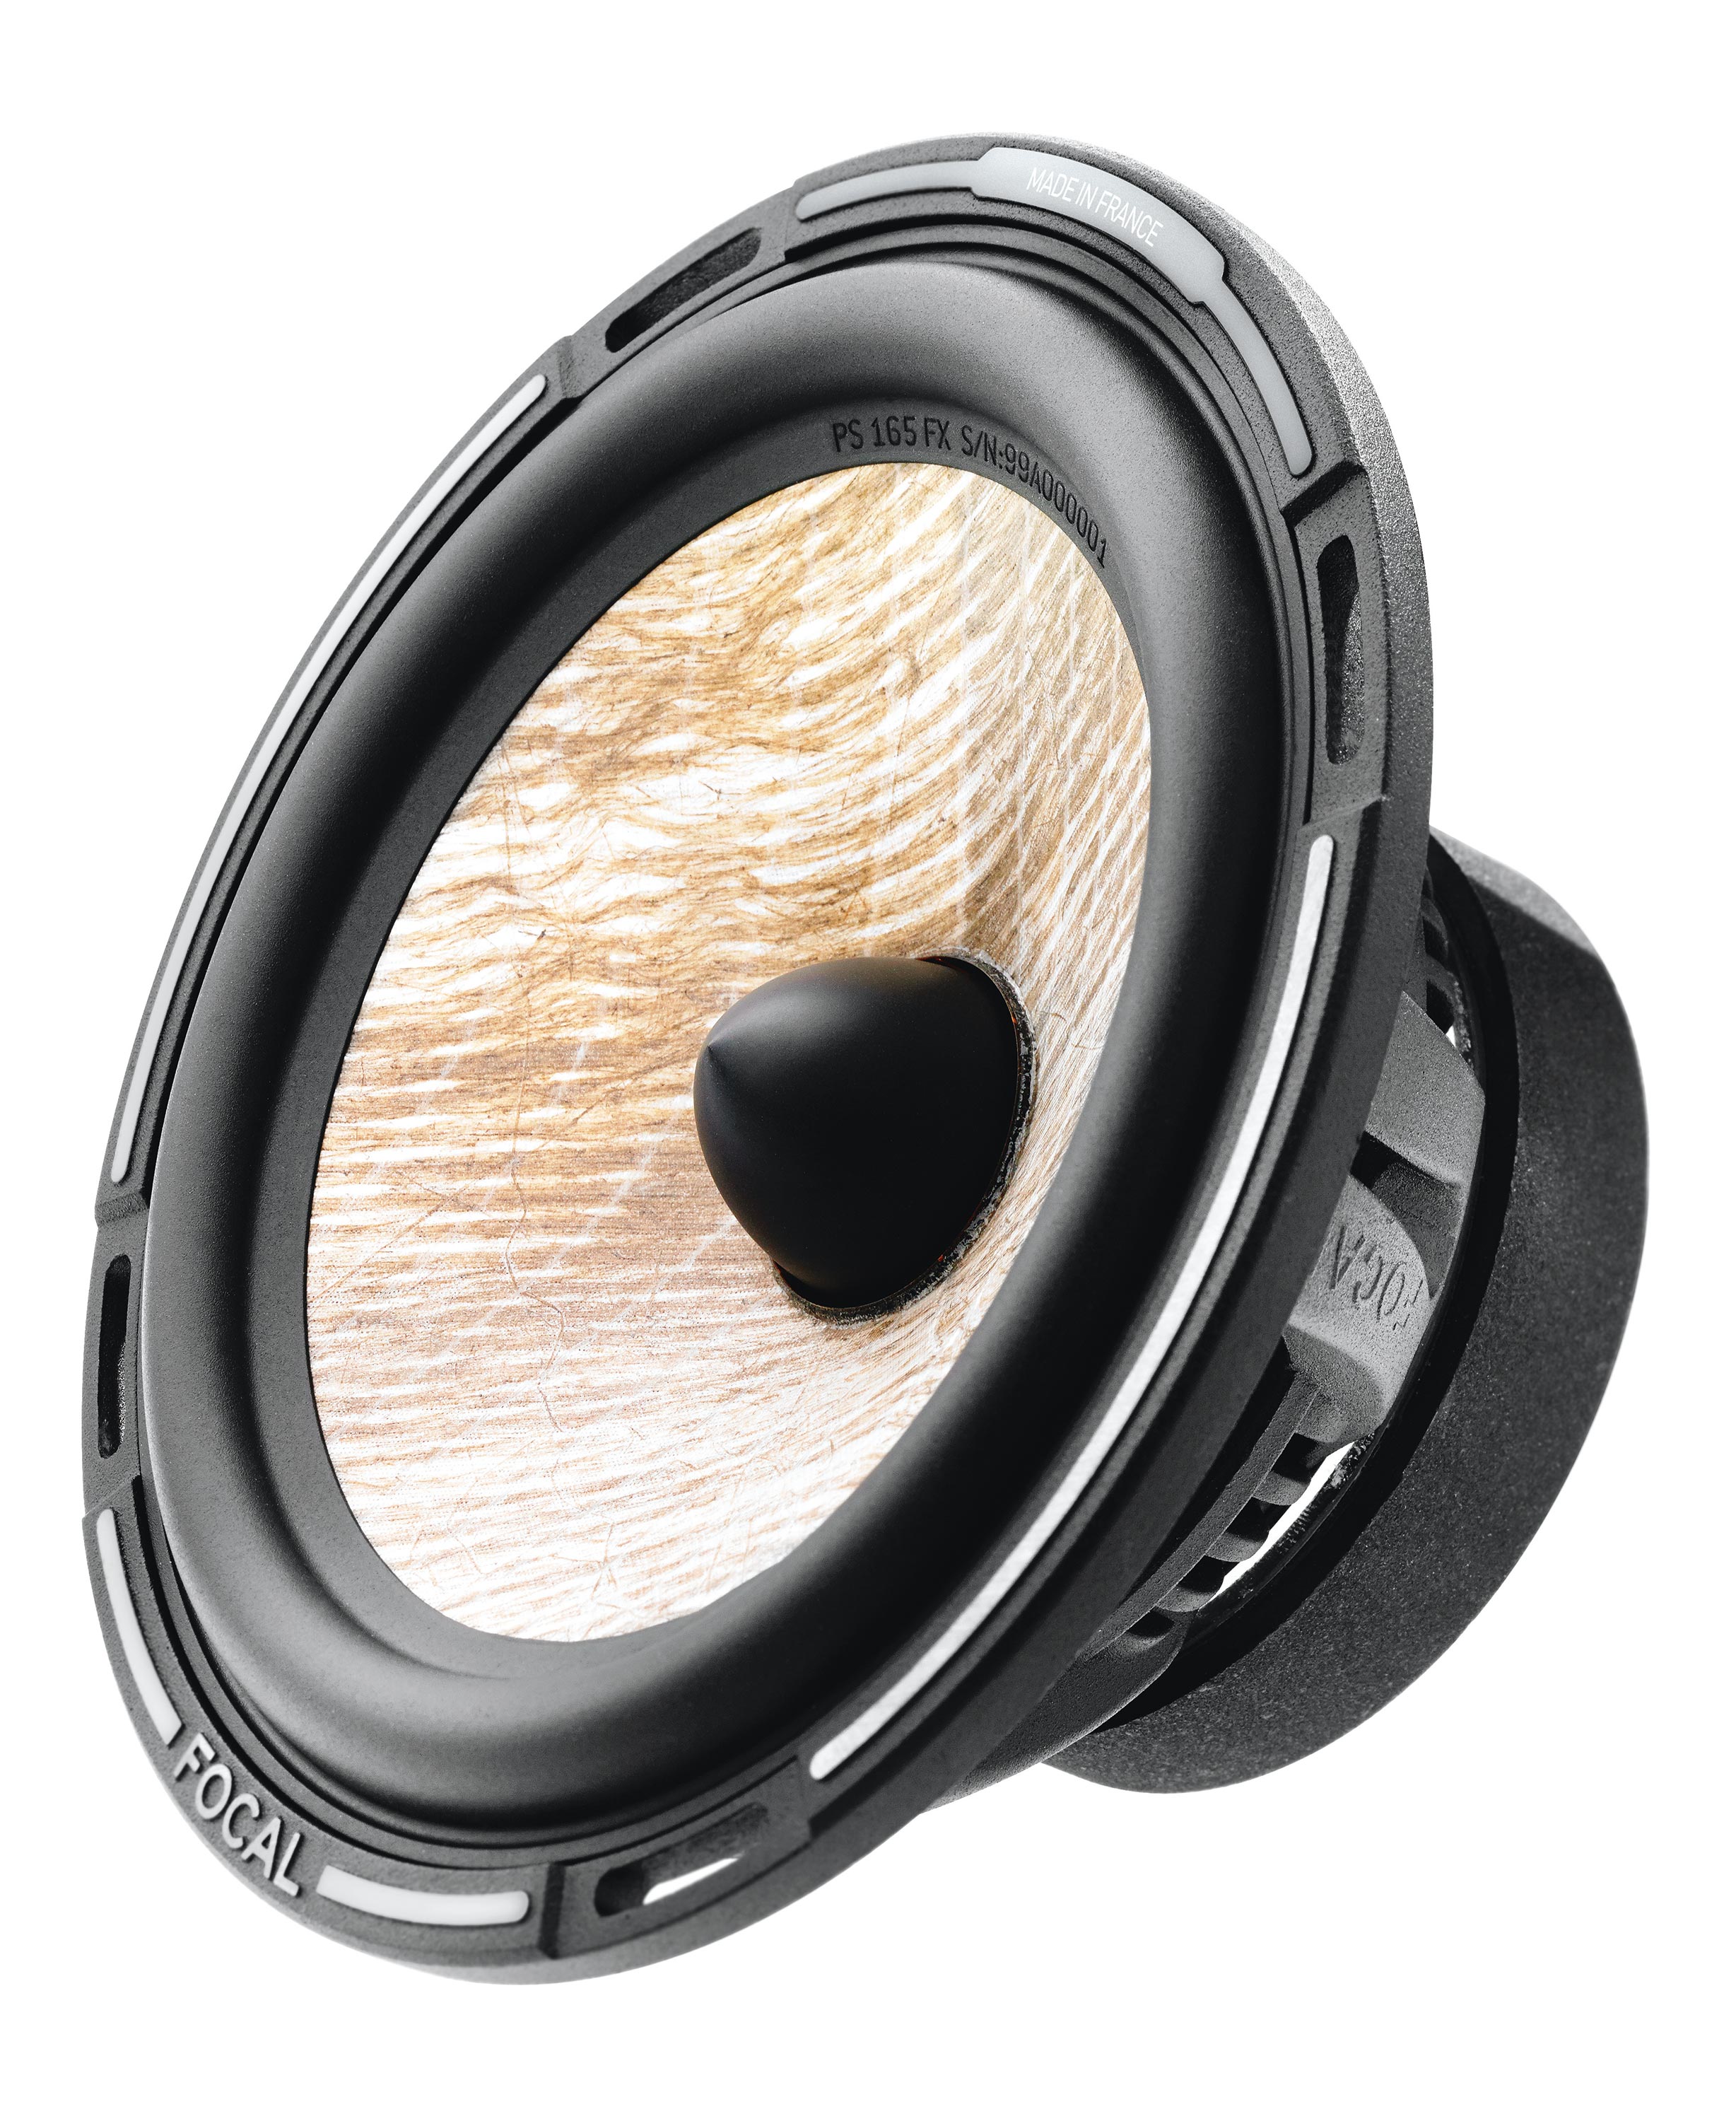 Focal PS 165FX Component Speaker Review